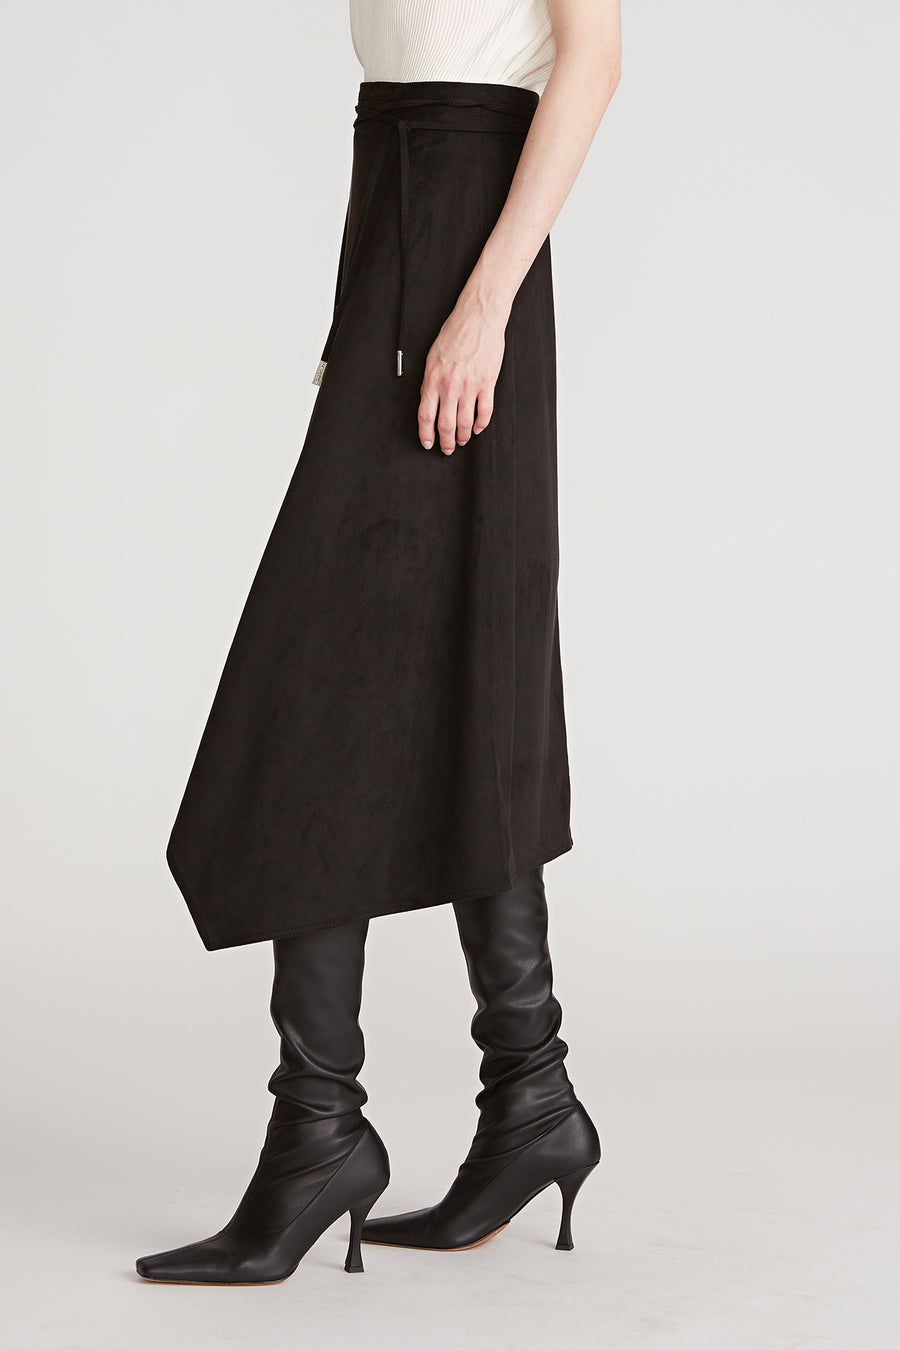 Mallory Suede Skirt